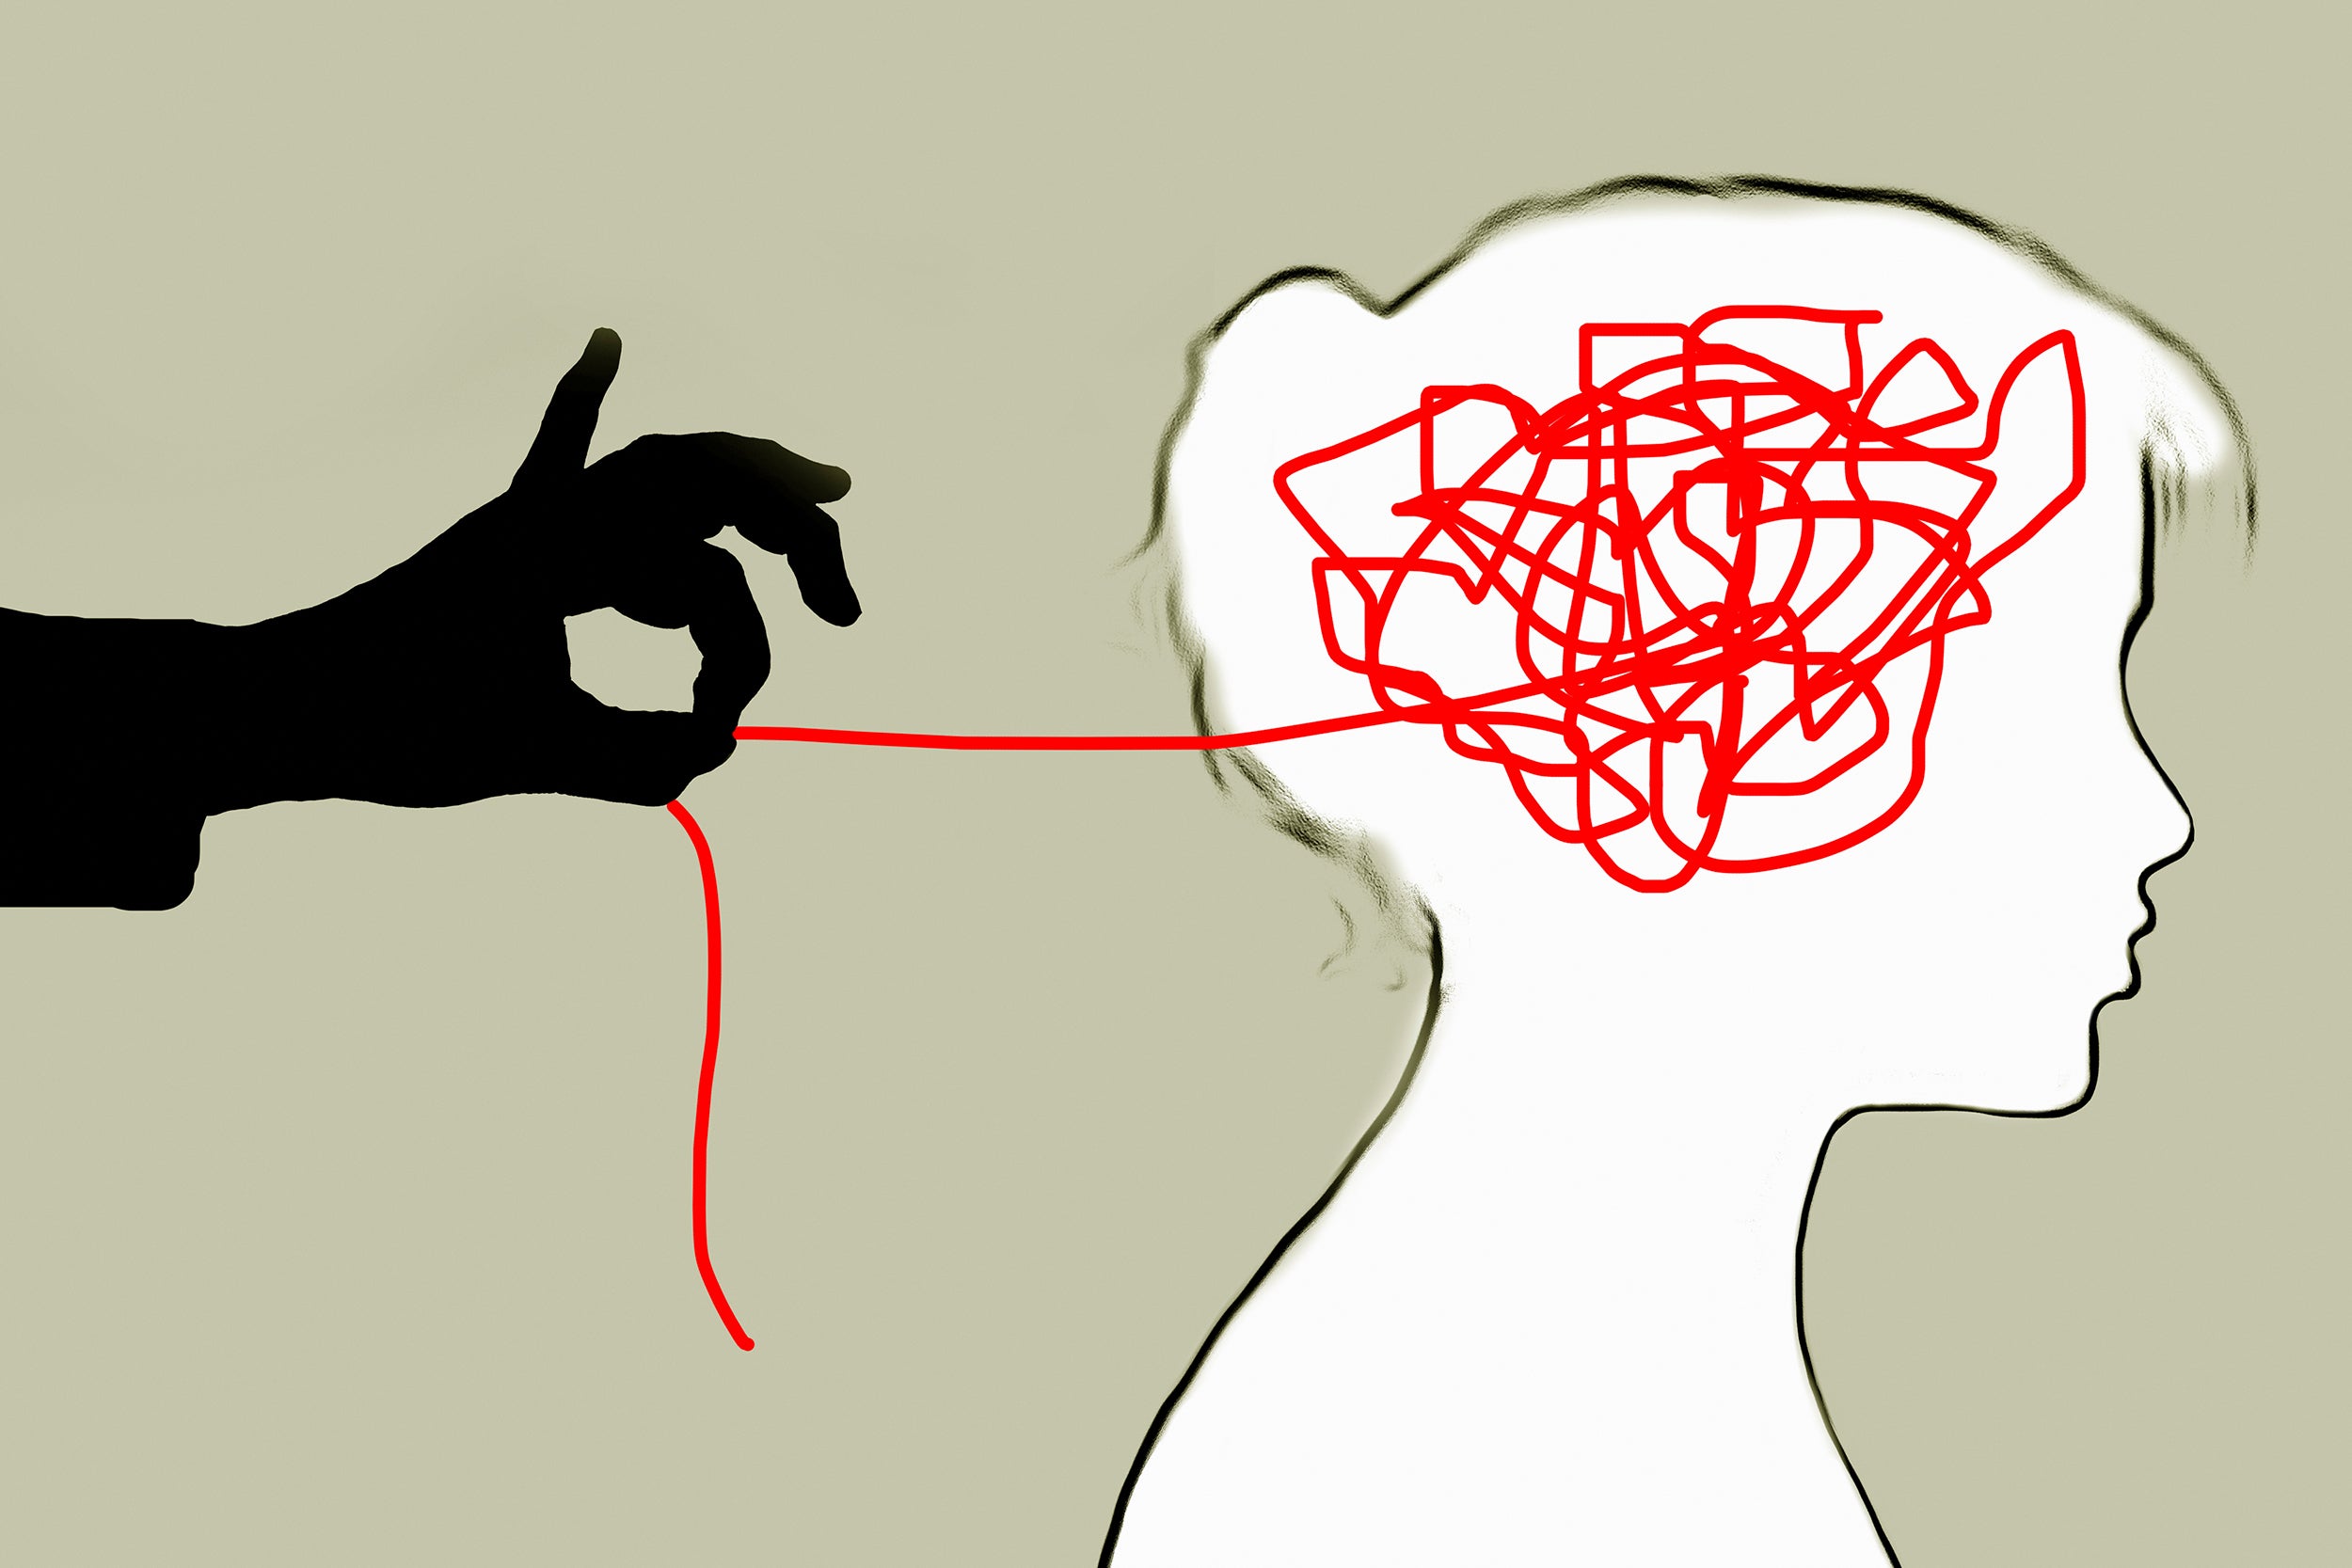 Illustration of a person having stress unraveled.